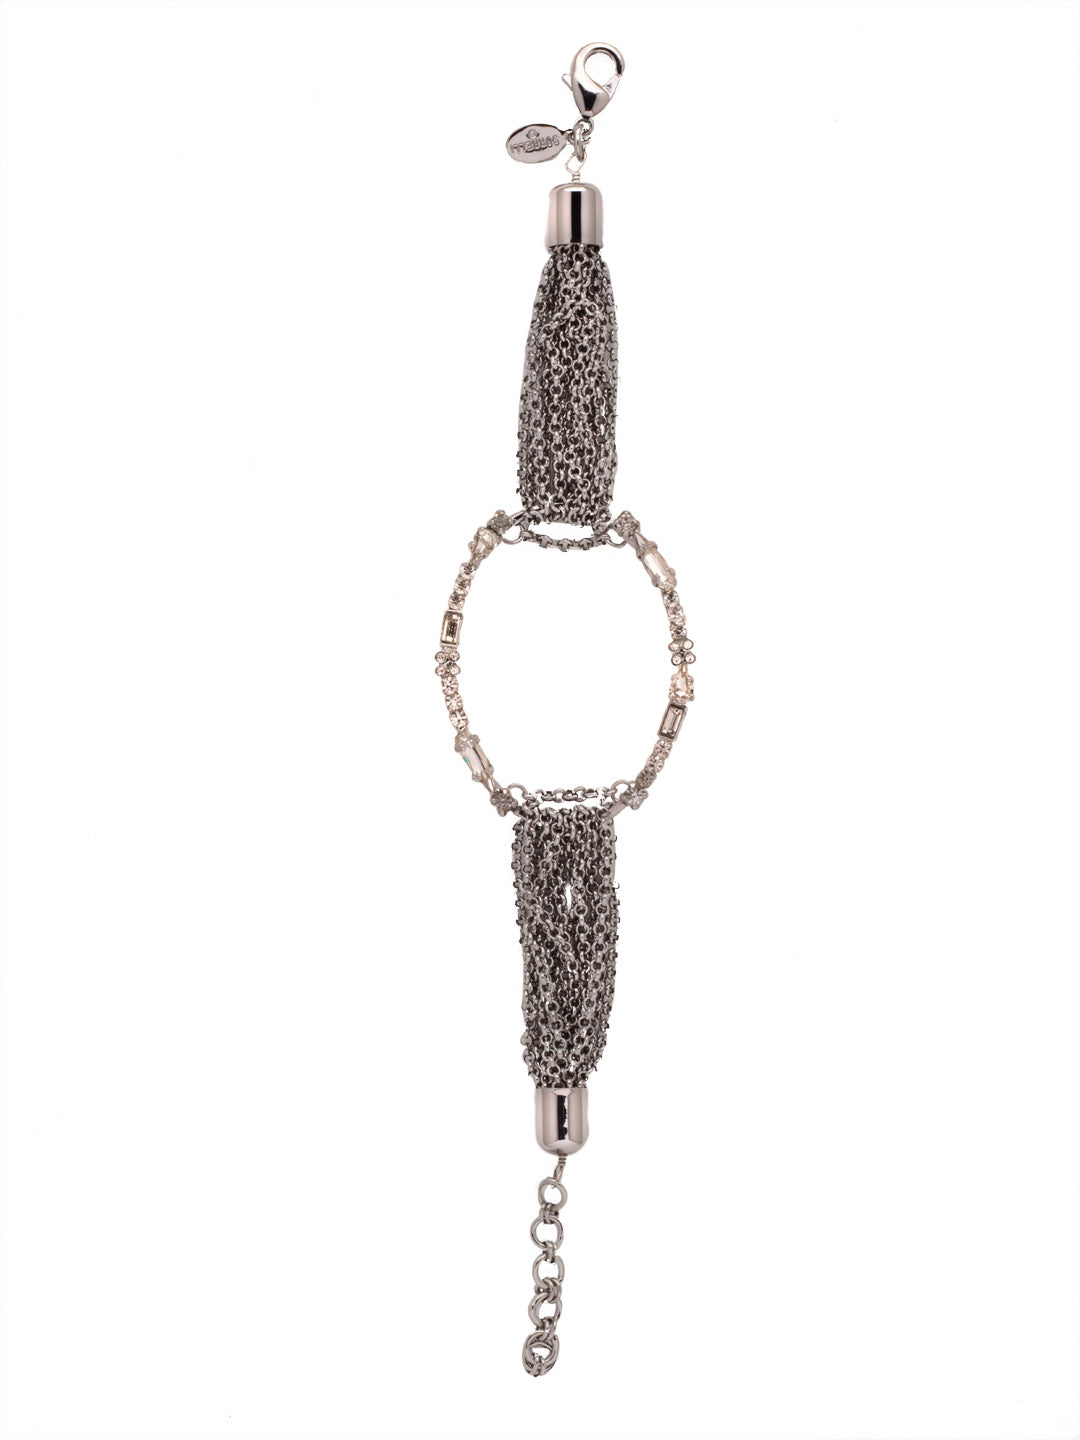 Ruth Statement Bracelet - BEU5PDCRY - <p>Feeling a bit edgy? Put on the Ruth Statement Bracelet featuring multi-strand metalwork and a circular center encrusted in sparkling crystals. From Sorrelli's Crystal collection in our Palladium finish.</p>